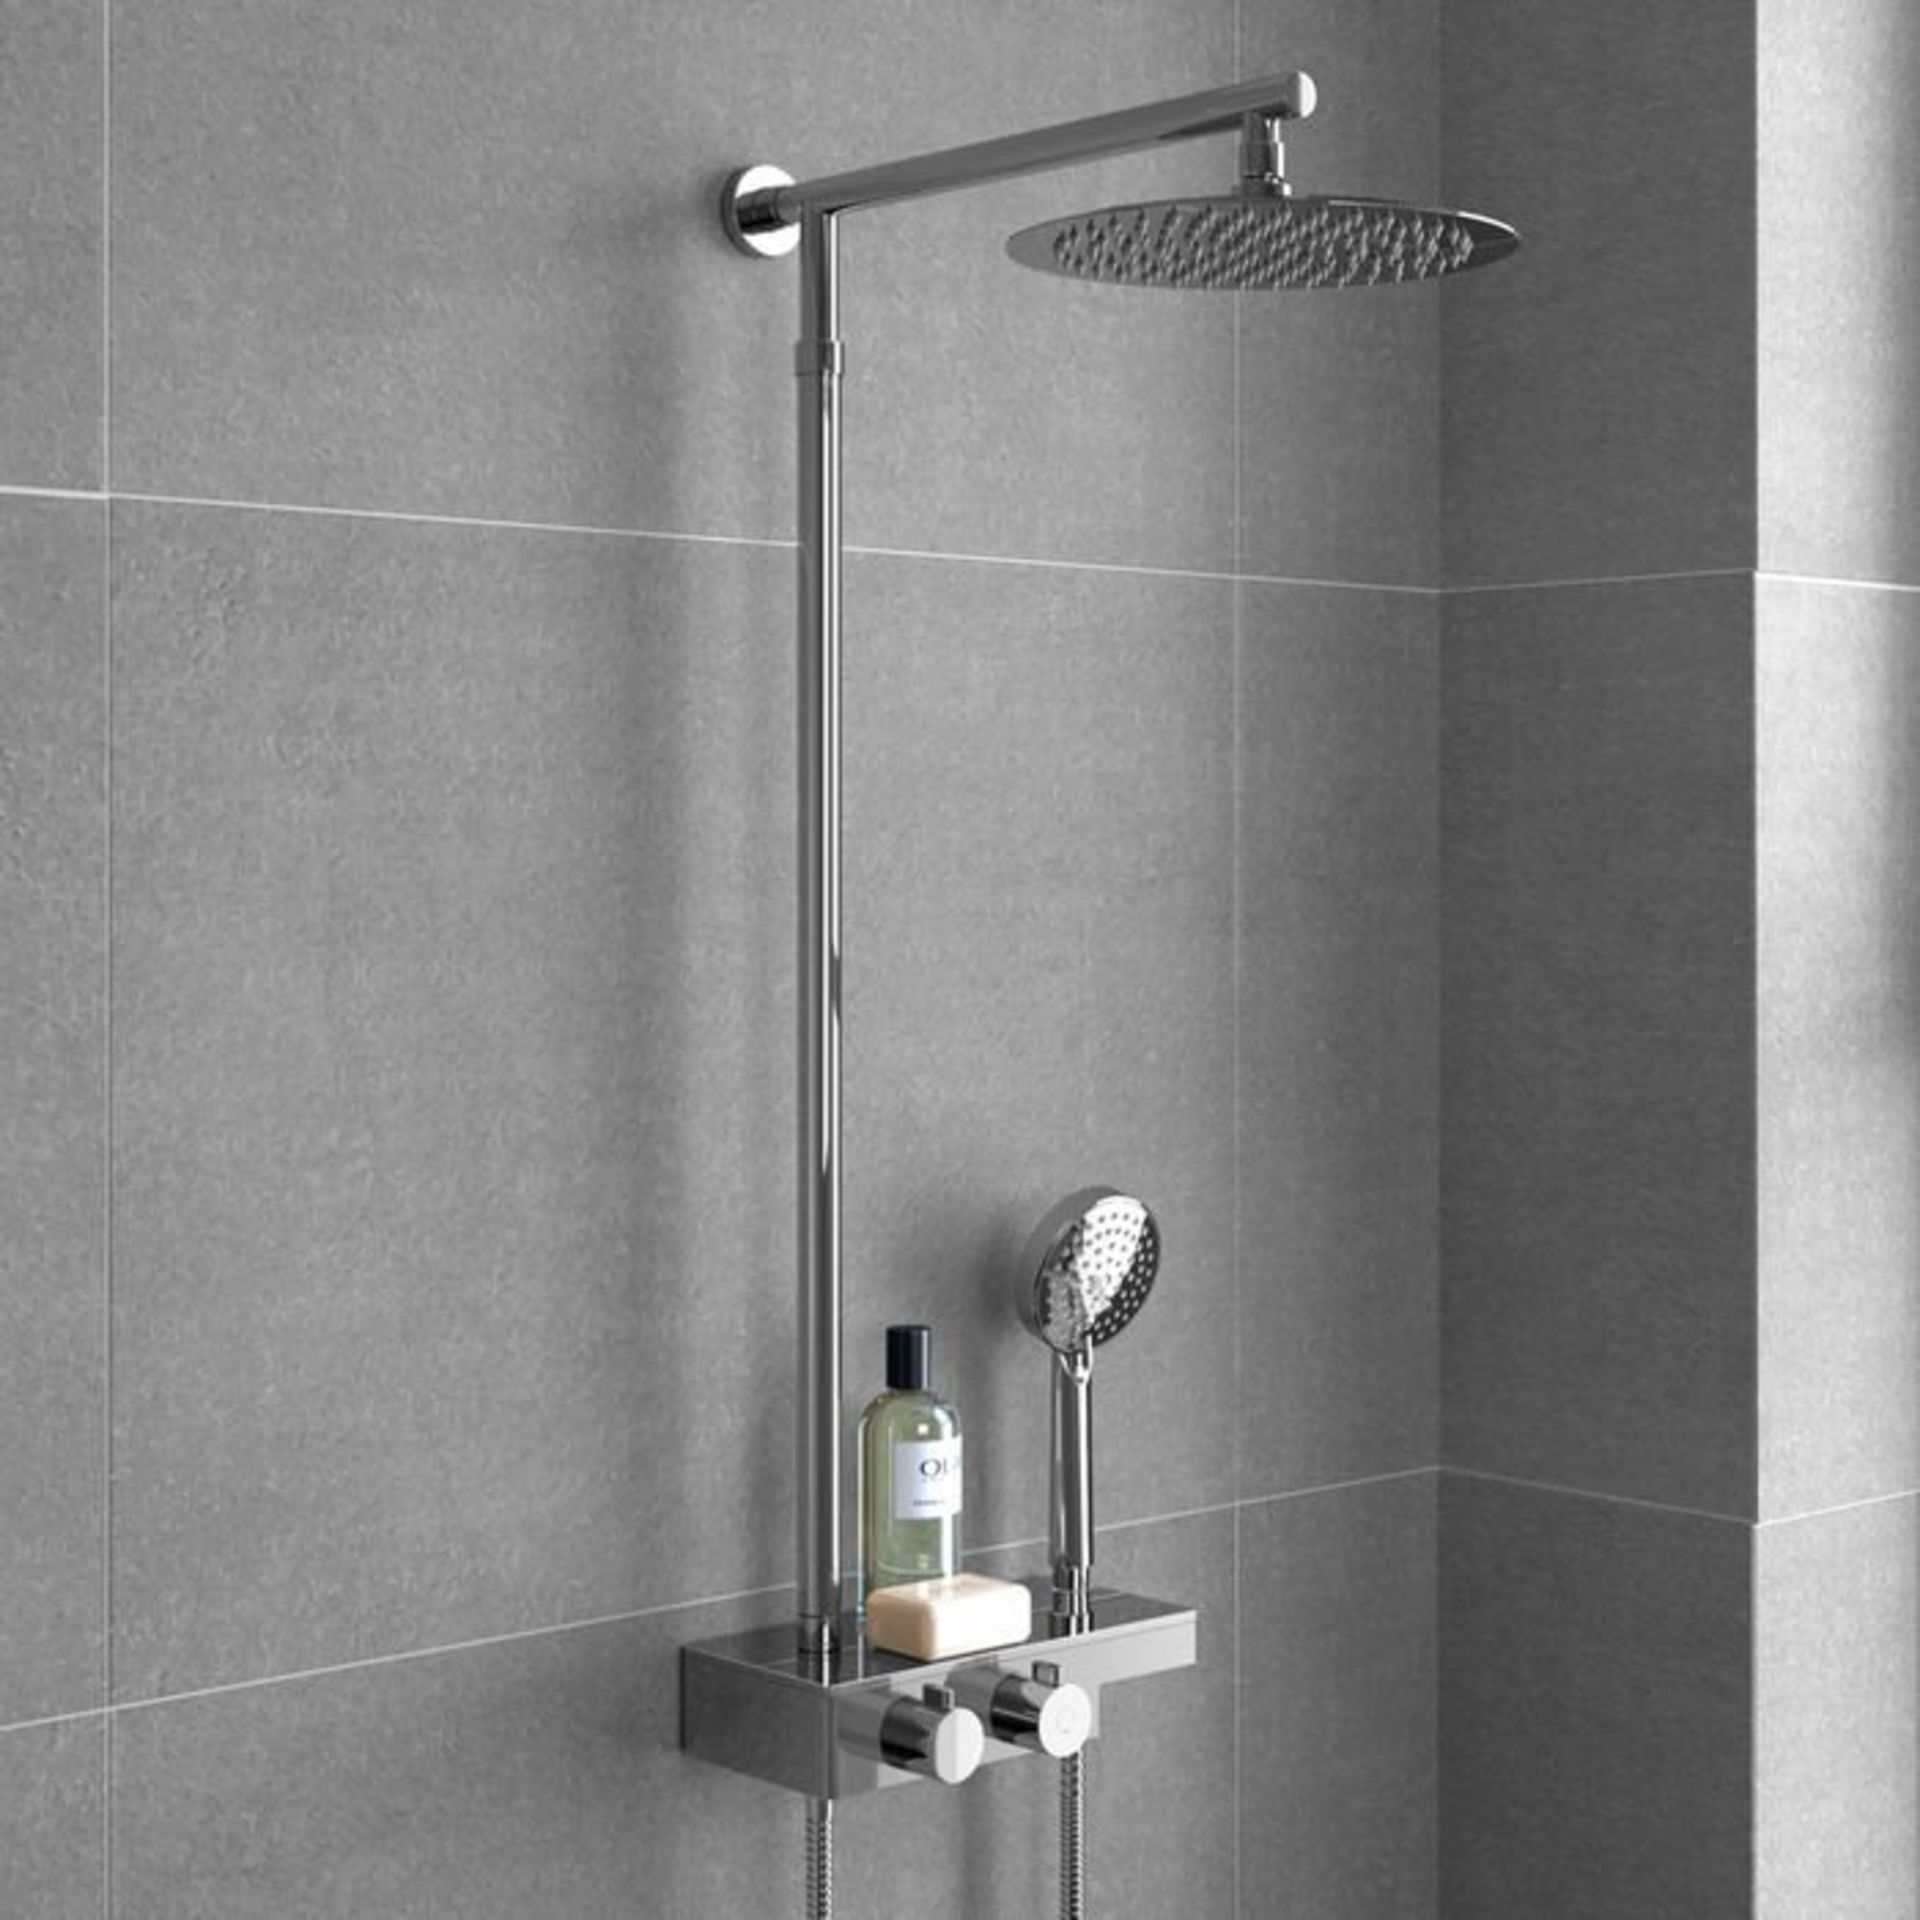 (H214) Round Exposed Thermostatic Mixer Shower Kit & Large Head. Cool to touch shower for additional - Image 2 of 6